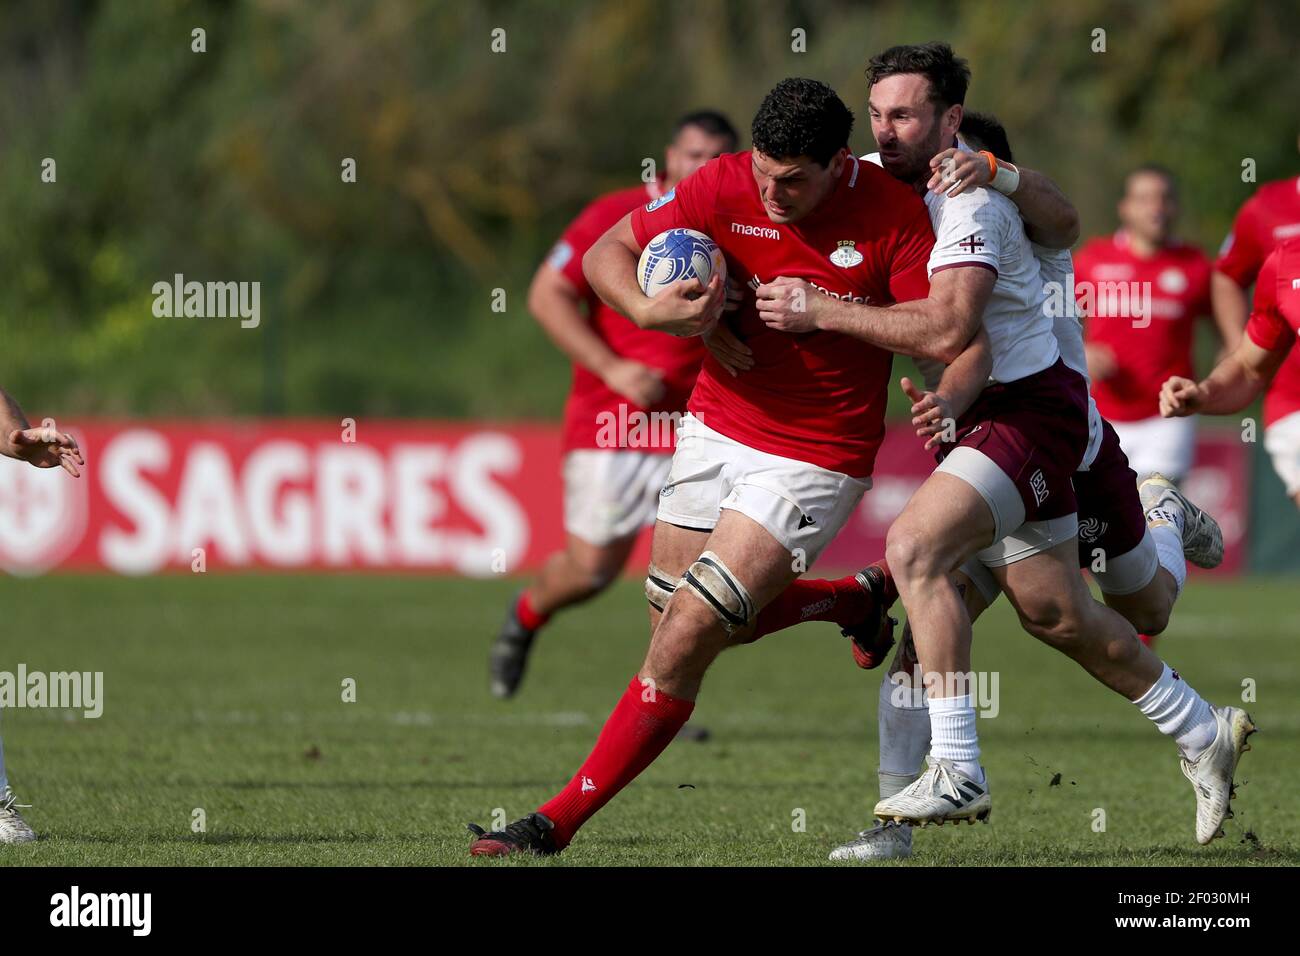 Lisbon, Portugal. 6th Mar, 2021. Jose Rebelo de Andrade of Portugal (C ) vies with Aleksandre Todua of Georgia (R ) during the Rugby Europe Championship match between Portugal and Georgia at the Jamor field in Lisbon, Portugal on March 6, 2021. Credit: Pedro Fiuza/ZUMA Wire/Alamy Live News Stock Photo